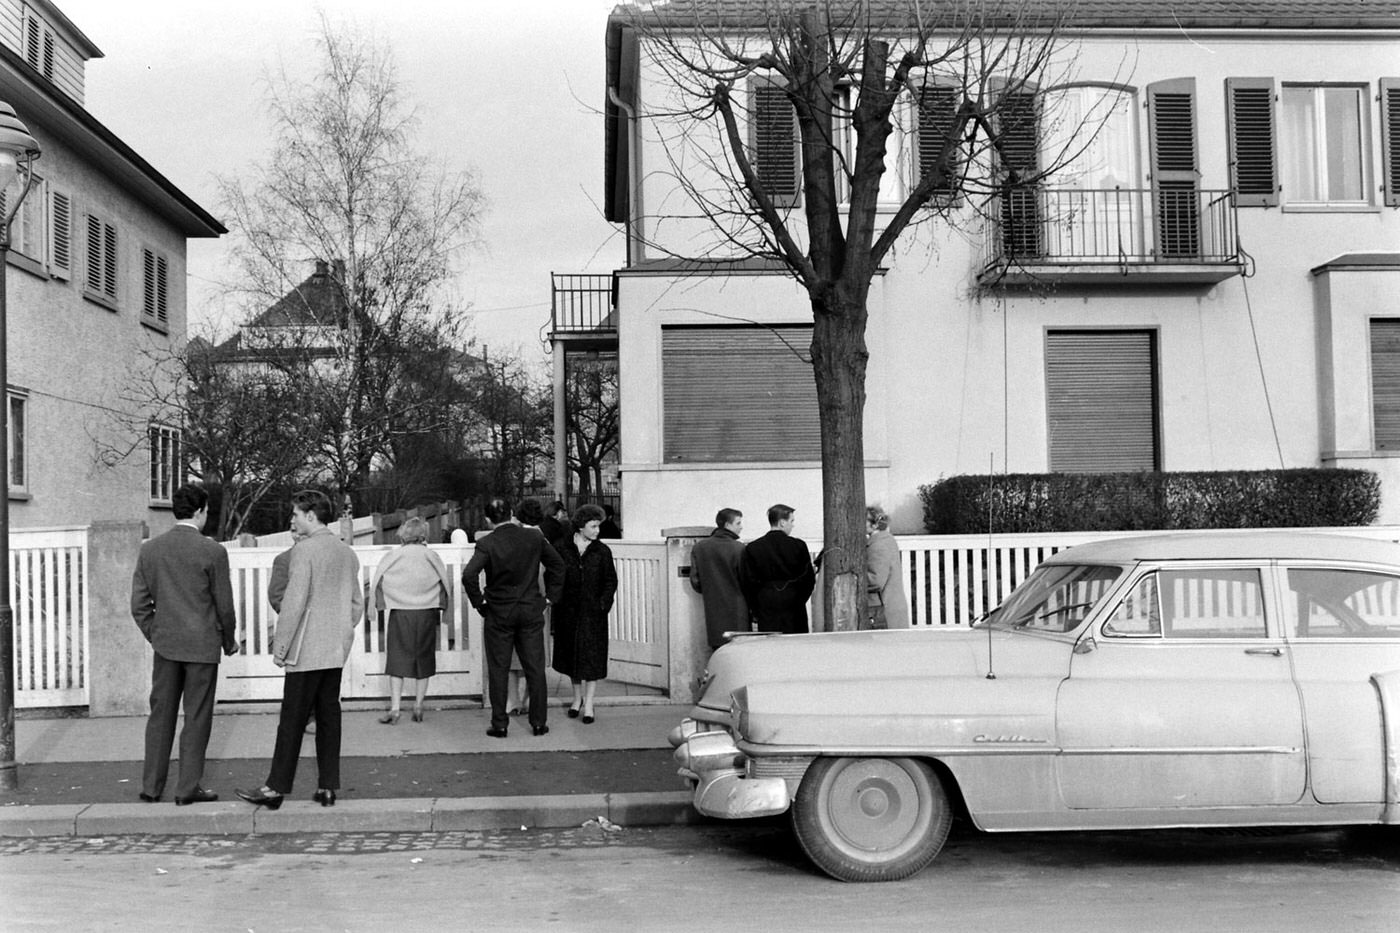 Elvis Presley fans congregate at the house in which Elvis and his family lived, shortly after he left the house for the last time, Bad Nauheim, Germany, March 1960.